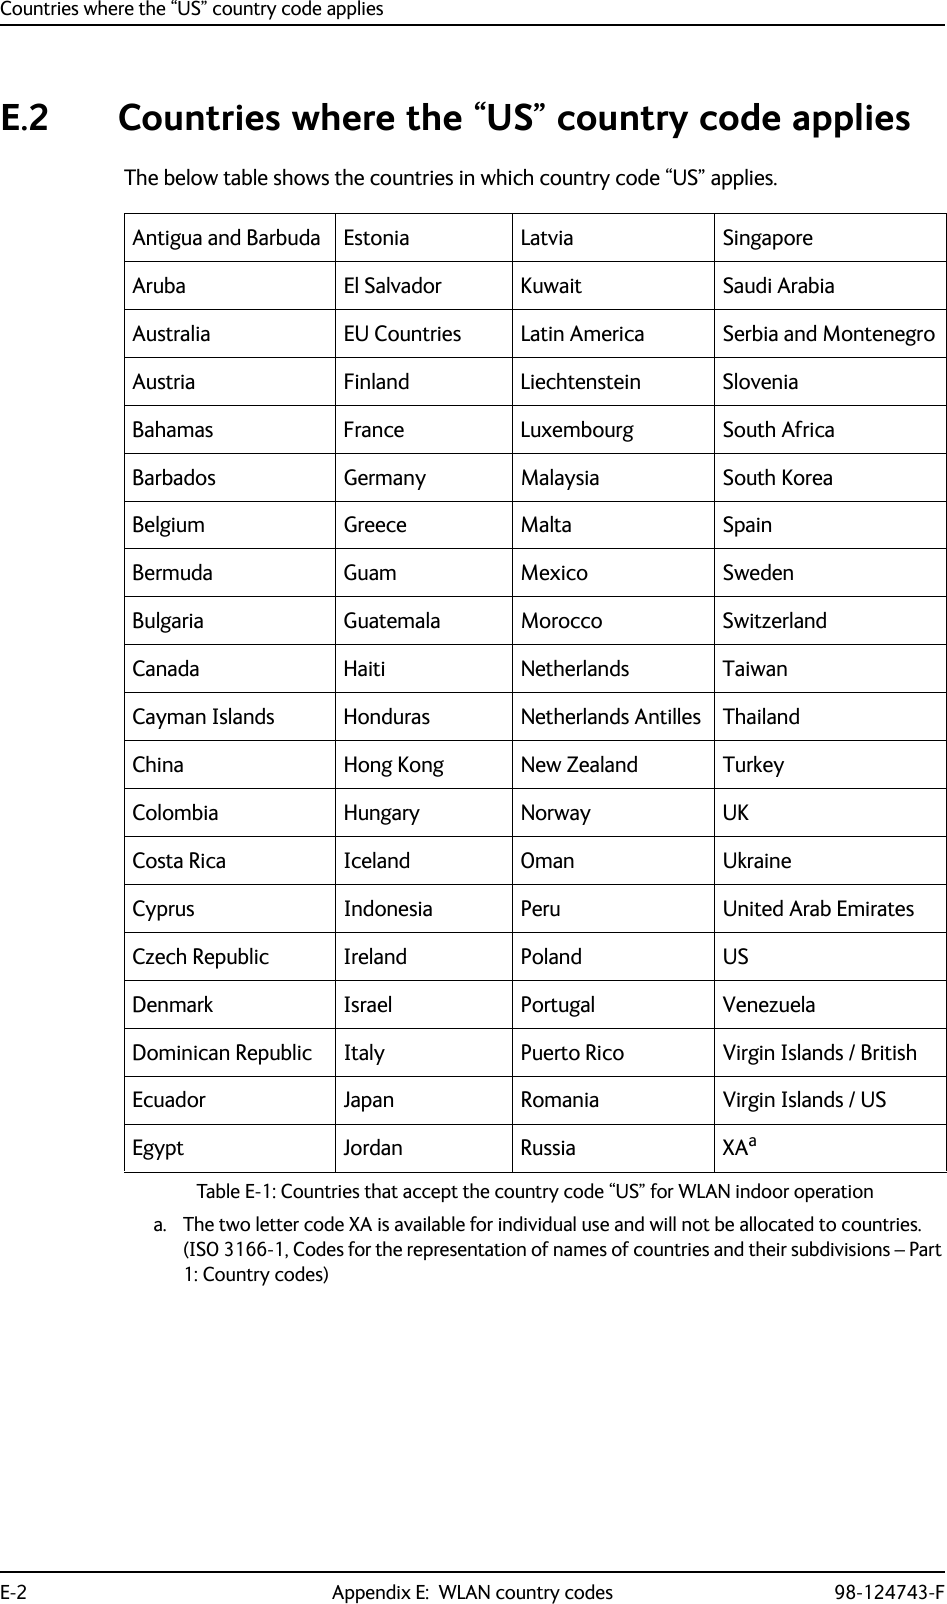 Countries where the “US” country code appliesE-2 Appendix E:  WLAN country codes 98-124743-FE.2 Countries where the “US” country code appliesThe below table shows the countries in which country code “US” applies.Antigua and Barbuda Estonia Latvia SingaporeAruba El Salvador Kuwait Saudi ArabiaAustralia EU Countries Latin America Serbia and MontenegroAustria Finland Liechtenstein SloveniaBahamas France Luxembourg South AfricaBarbados Germany Malaysia South KoreaBelgium Greece Malta SpainBermuda Guam Mexico SwedenBulgaria Guatemala Morocco SwitzerlandCanada Haiti Netherlands TaiwanCayman Islands Honduras Netherlands Antilles ThailandChina Hong Kong New Zealand TurkeyColombia Hungary Norway UKCosta Rica Iceland Oman UkraineCyprus Indonesia Peru United Arab EmiratesCzech Republic Ireland Poland USDenmark Israel Portugal VenezuelaDominican Republic Italy Puerto Rico Virgin Islands / BritishEcuador Japan Romania Virgin Islands / USEgypt Jordan Russia XAaa. The two letter code XA is available for individual use and will not be allocated to countries. (ISO 3166-1, Codes for the representation of names of countries and their subdivisions – Part 1: Country codes)Table E-1: Countries that accept the country code “US” for WLAN indoor operation